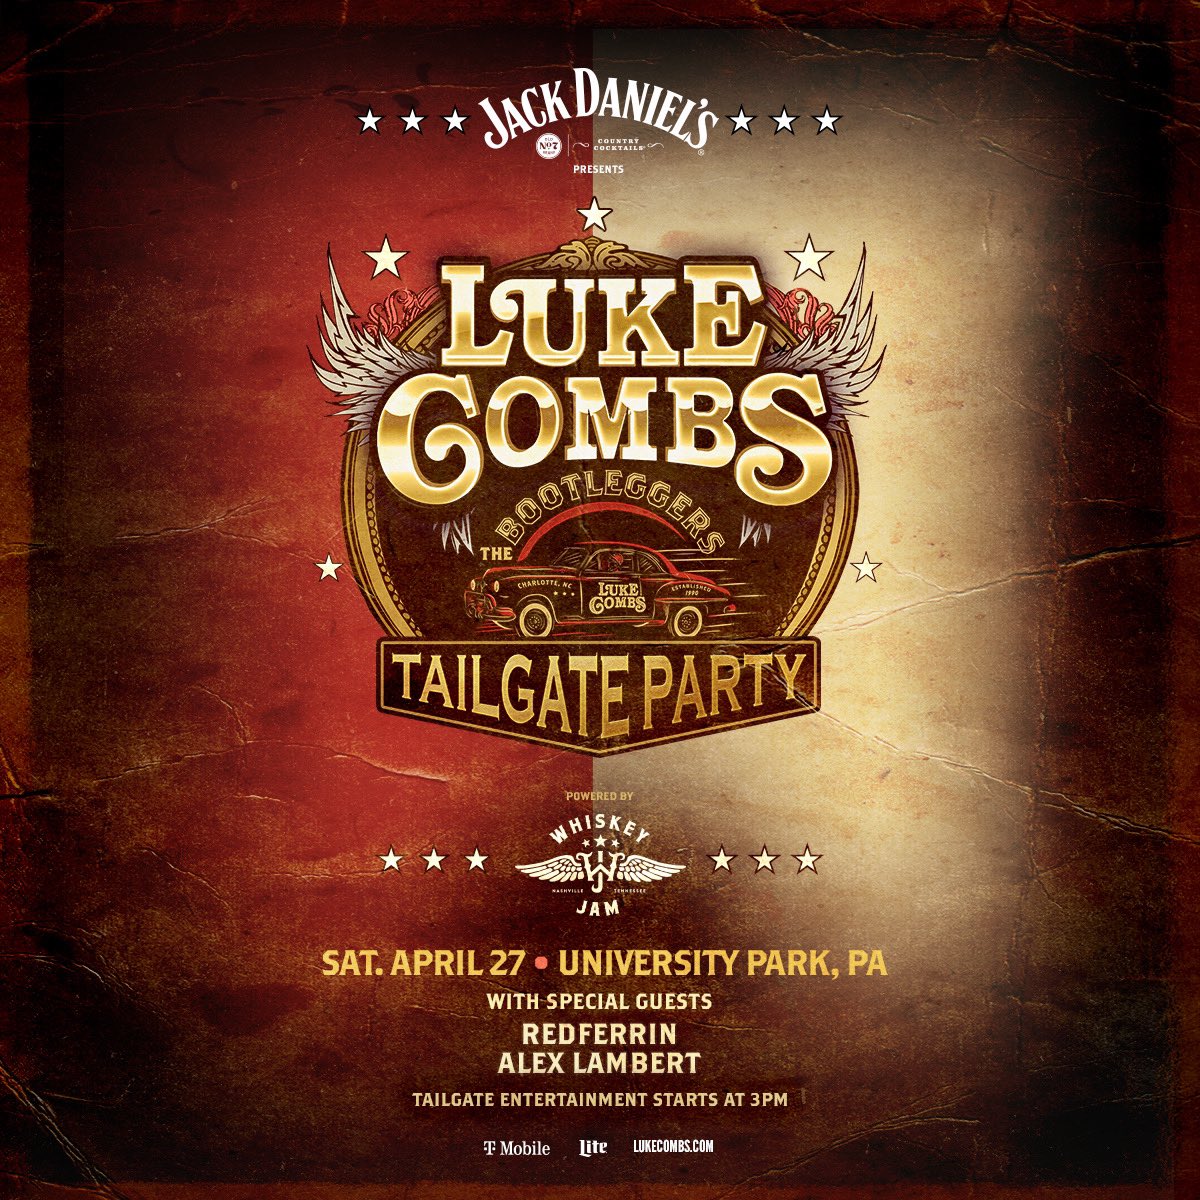 Come join me this weekend at the @WhiskeyJam Tailgate with @LukeCombs at Beaver Stadium, PA 🎸🥃